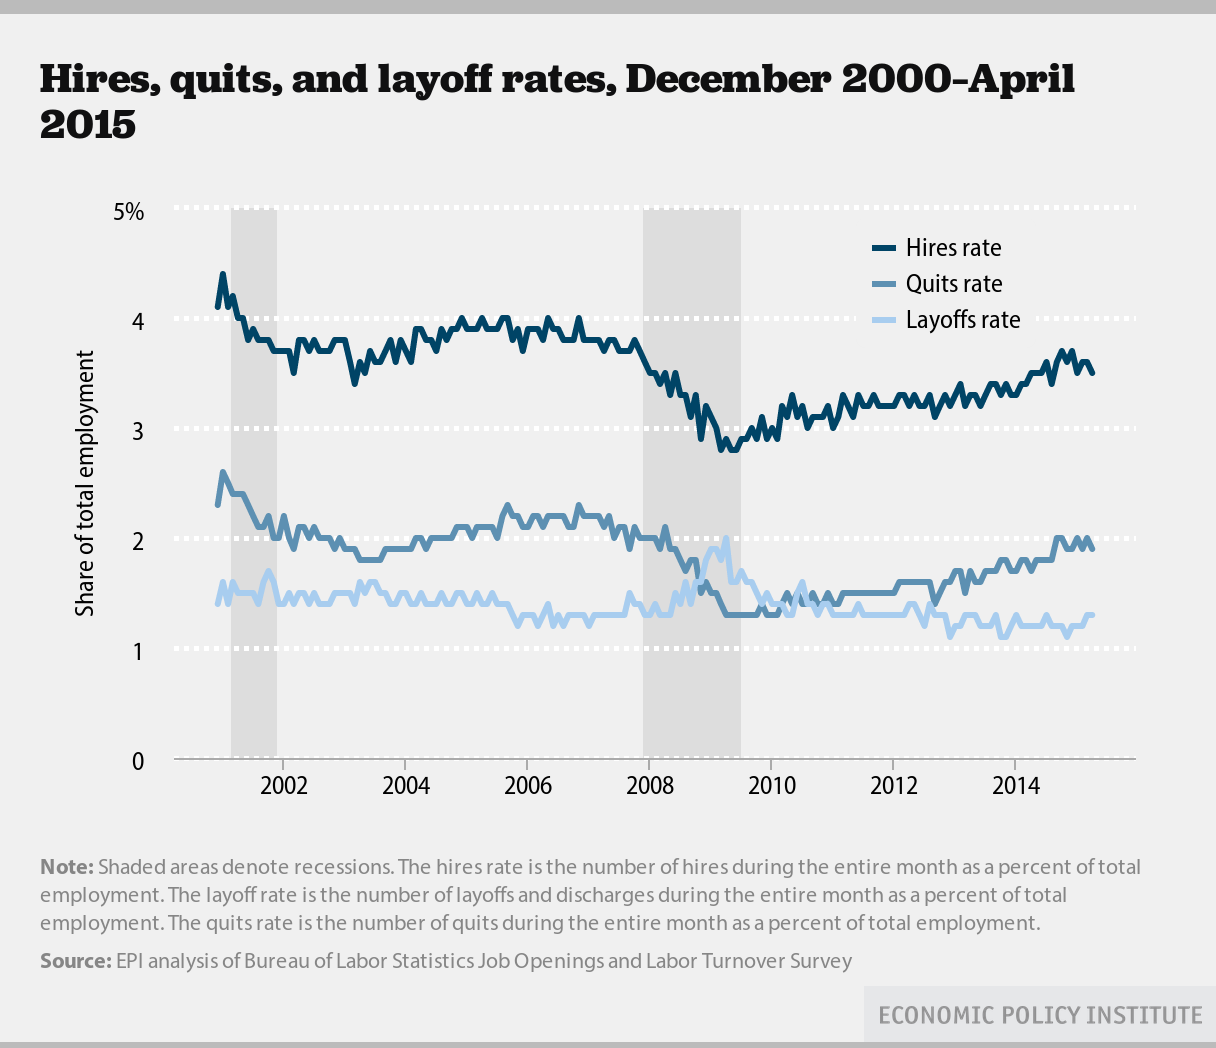 Hires, quits and layoffs